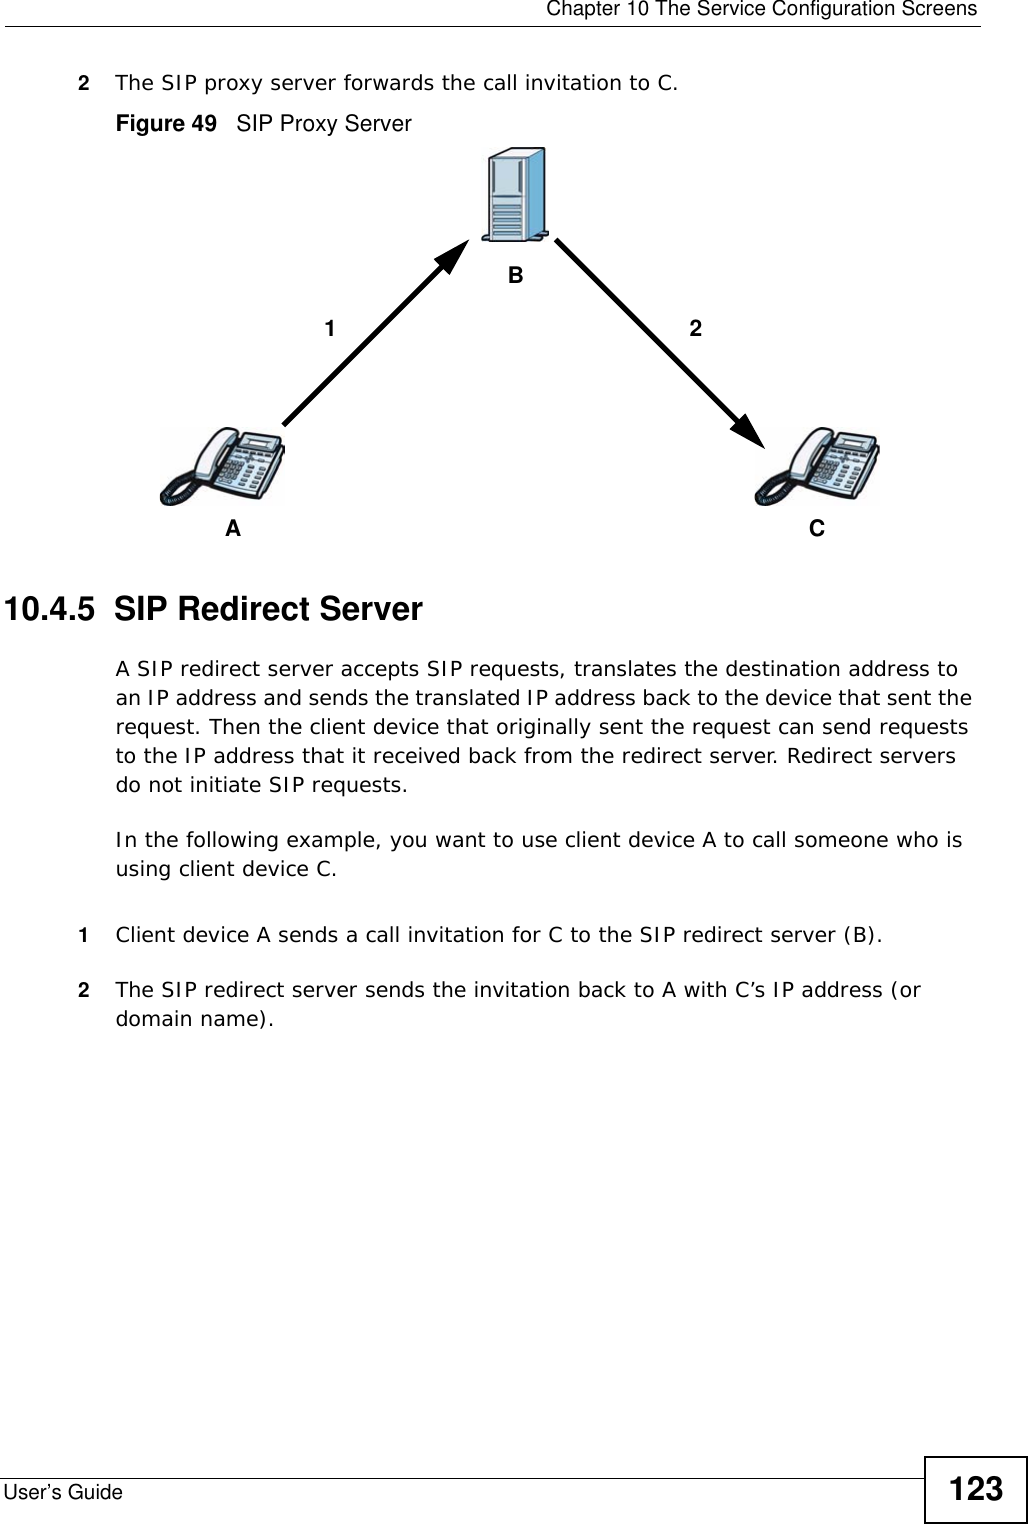  Chapter 10 The Service Configuration ScreensUser’s Guide 1232The SIP proxy server forwards the call invitation to C.Figure 49   SIP Proxy Server10.4.5  SIP Redirect ServerA SIP redirect server accepts SIP requests, translates the destination address to an IP address and sends the translated IP address back to the device that sent the request. Then the client device that originally sent the request can send requests to the IP address that it received back from the redirect server. Redirect servers do not initiate SIP requests. In the following example, you want to use client device A to call someone who is using client device C. 1Client device A sends a call invitation for C to the SIP redirect server (B).2The SIP redirect server sends the invitation back to A with C’s IP address (or domain name).ACB12